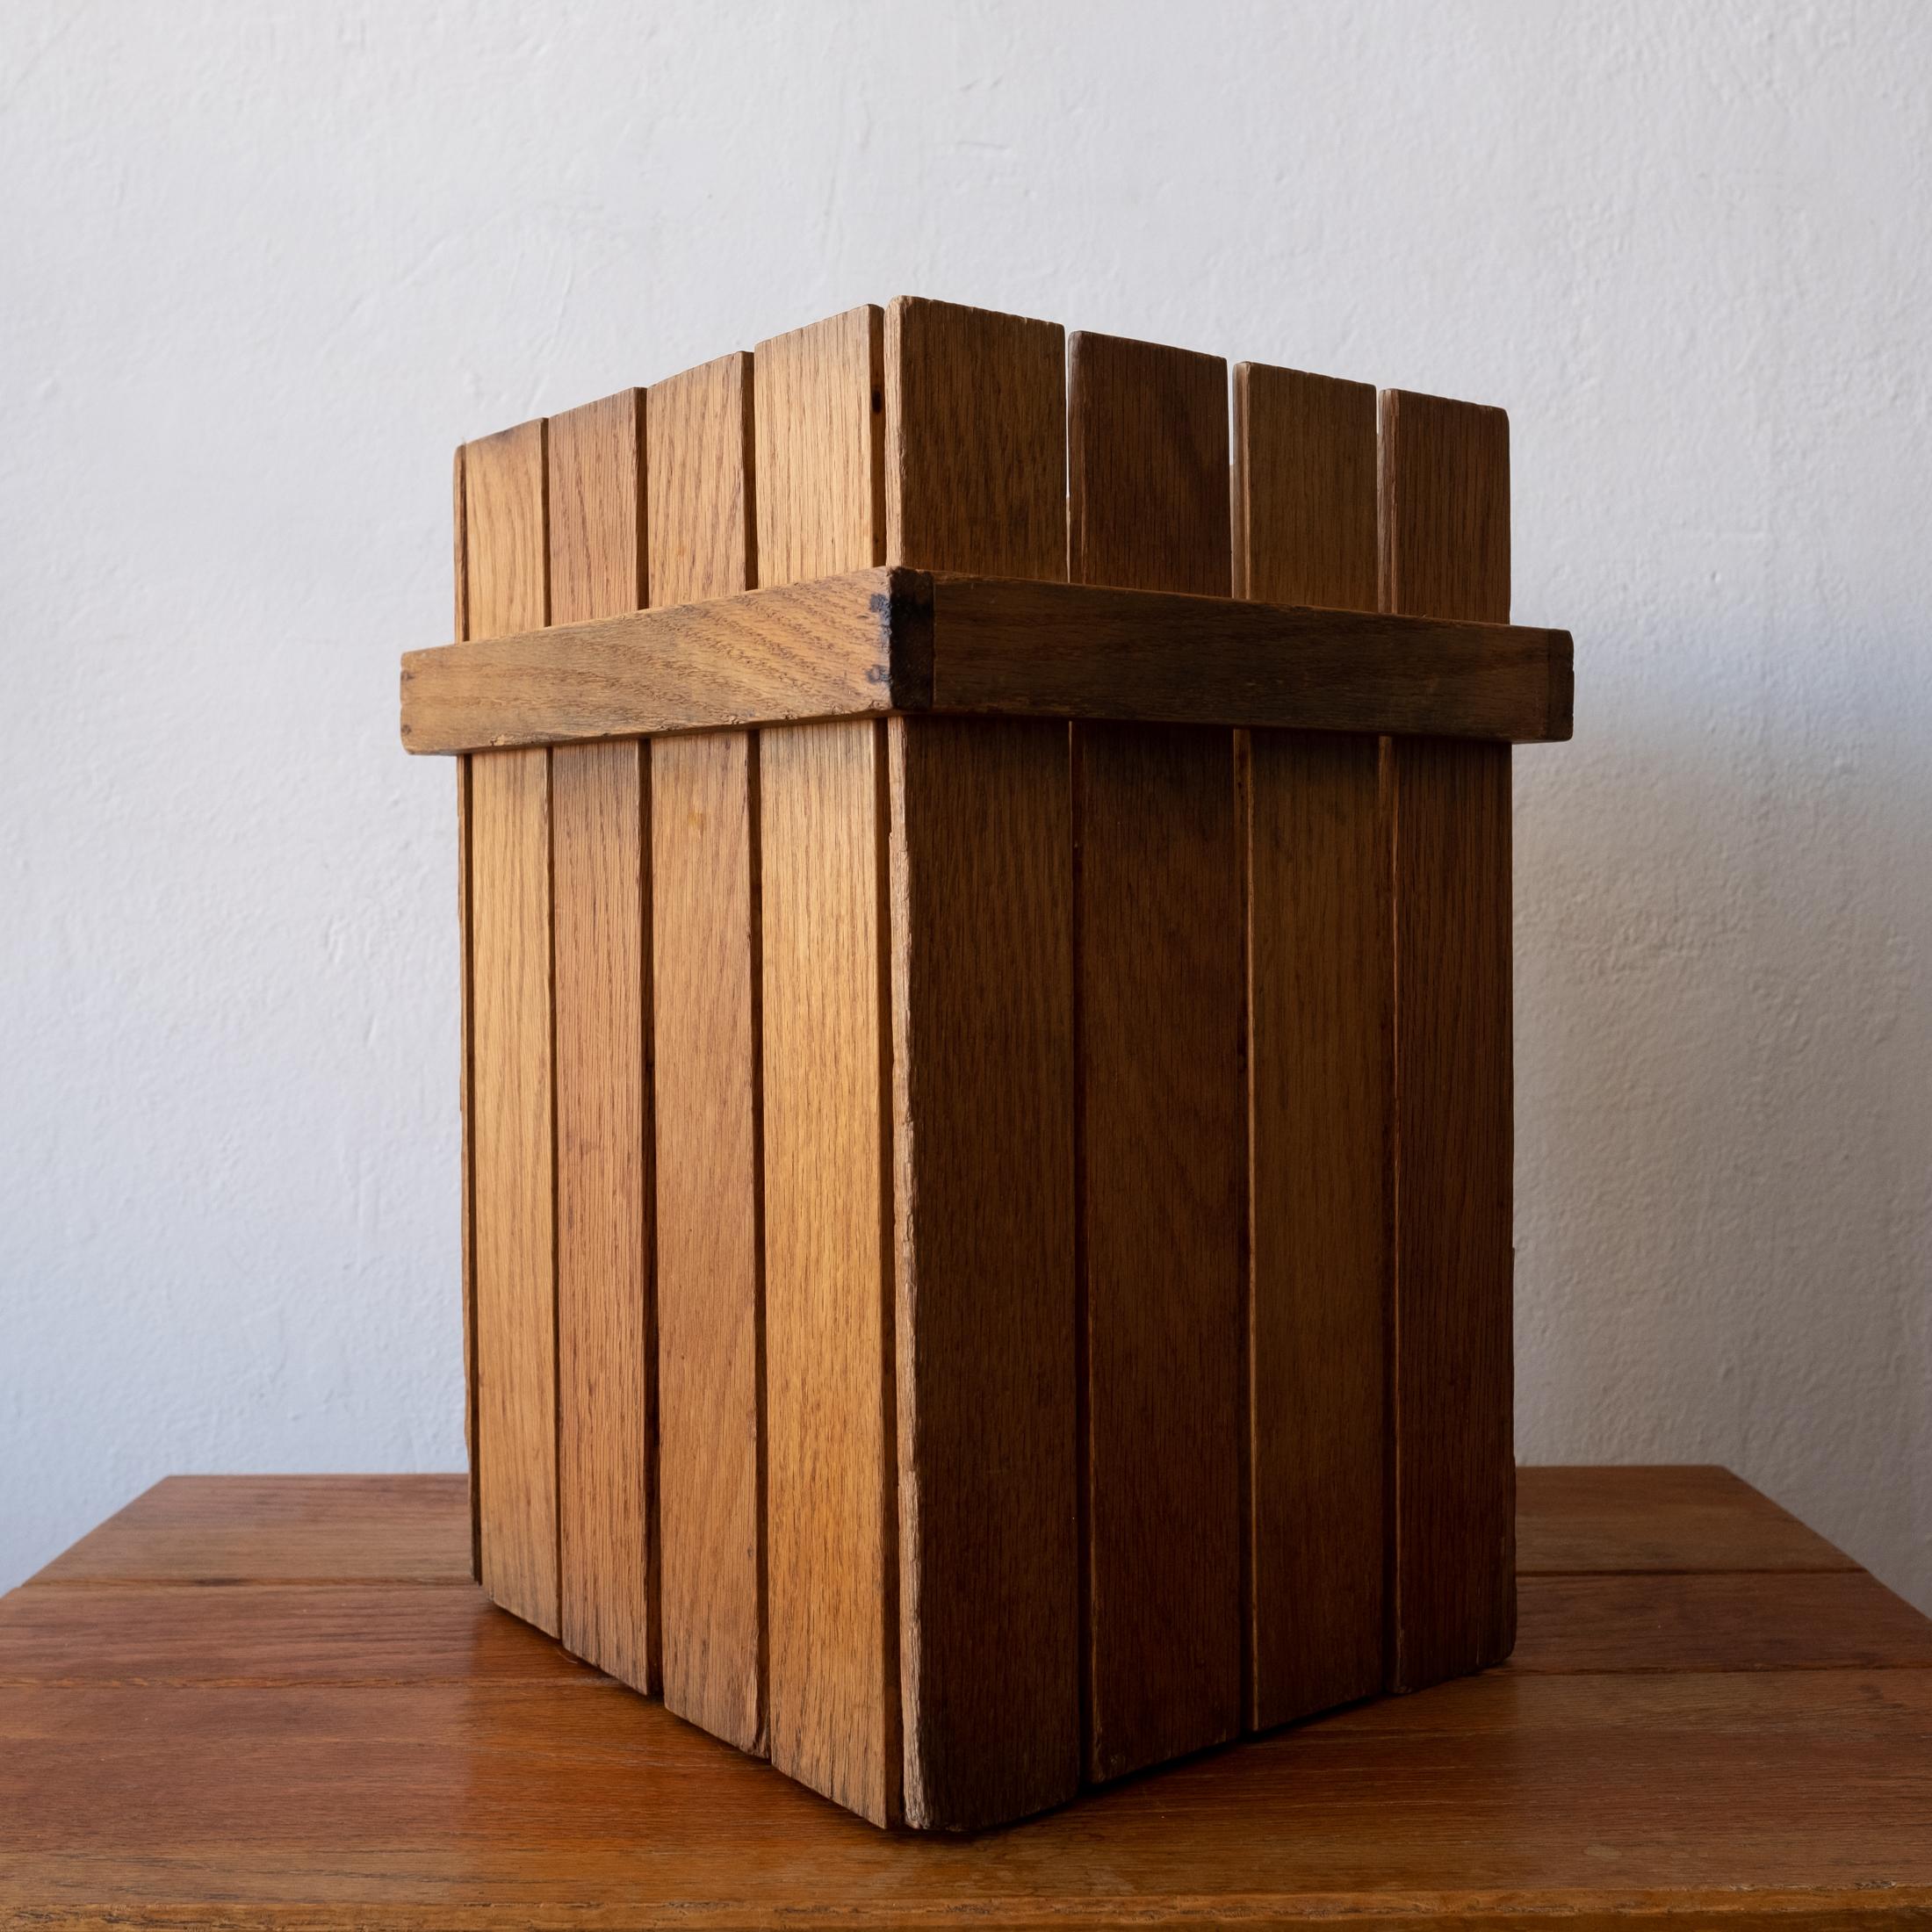 Handcrafted wood trash can from the mid century. Minimalist architectural design reminiscent of Frank Lloyd Wright. Sturdy construction.